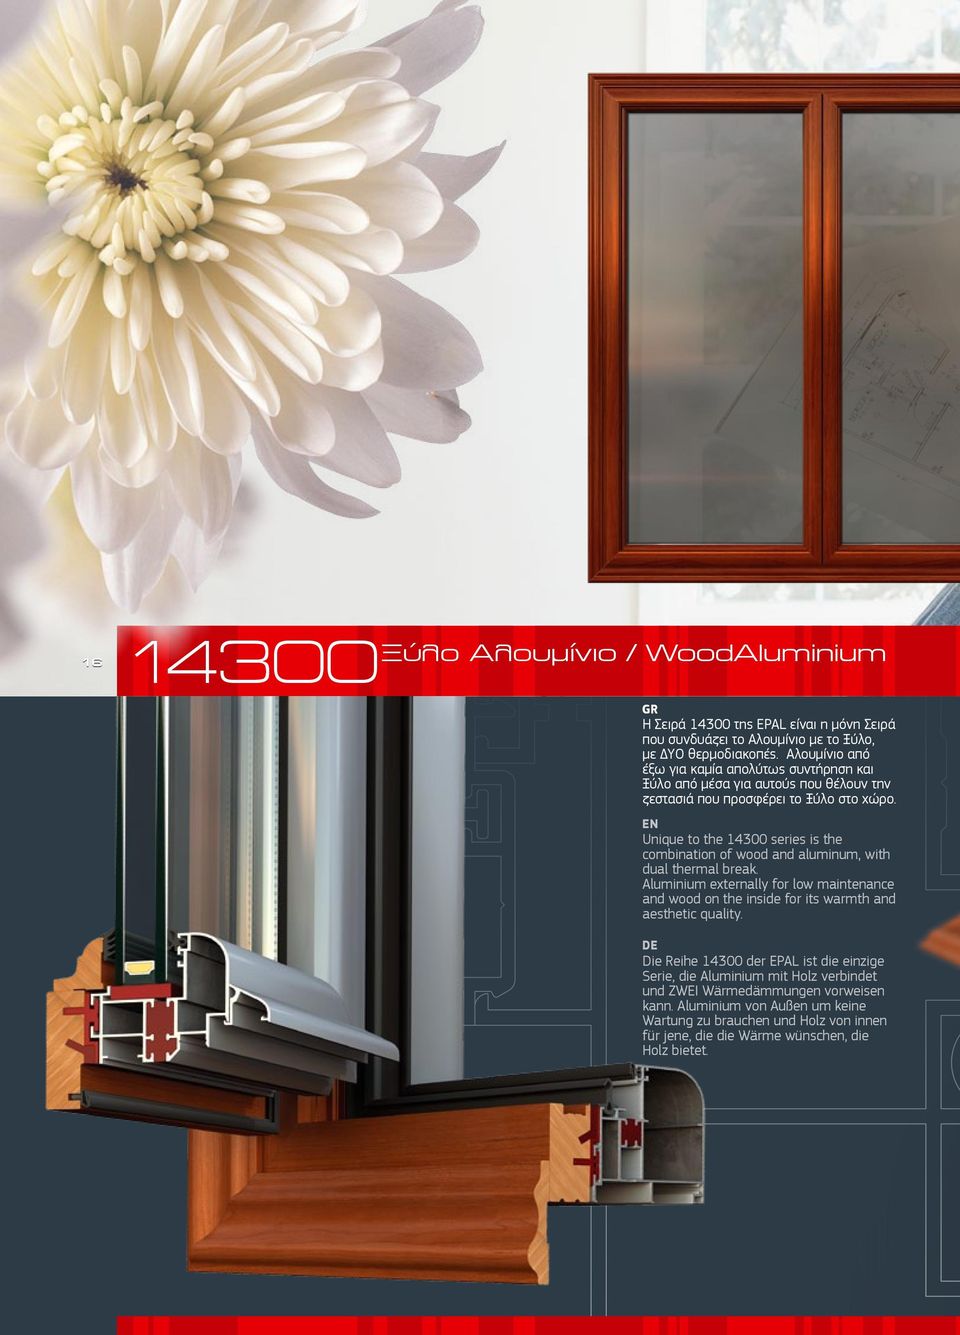 EN Unique to the 14300 series is the combination of wood and aluminum, with dual thermal break.